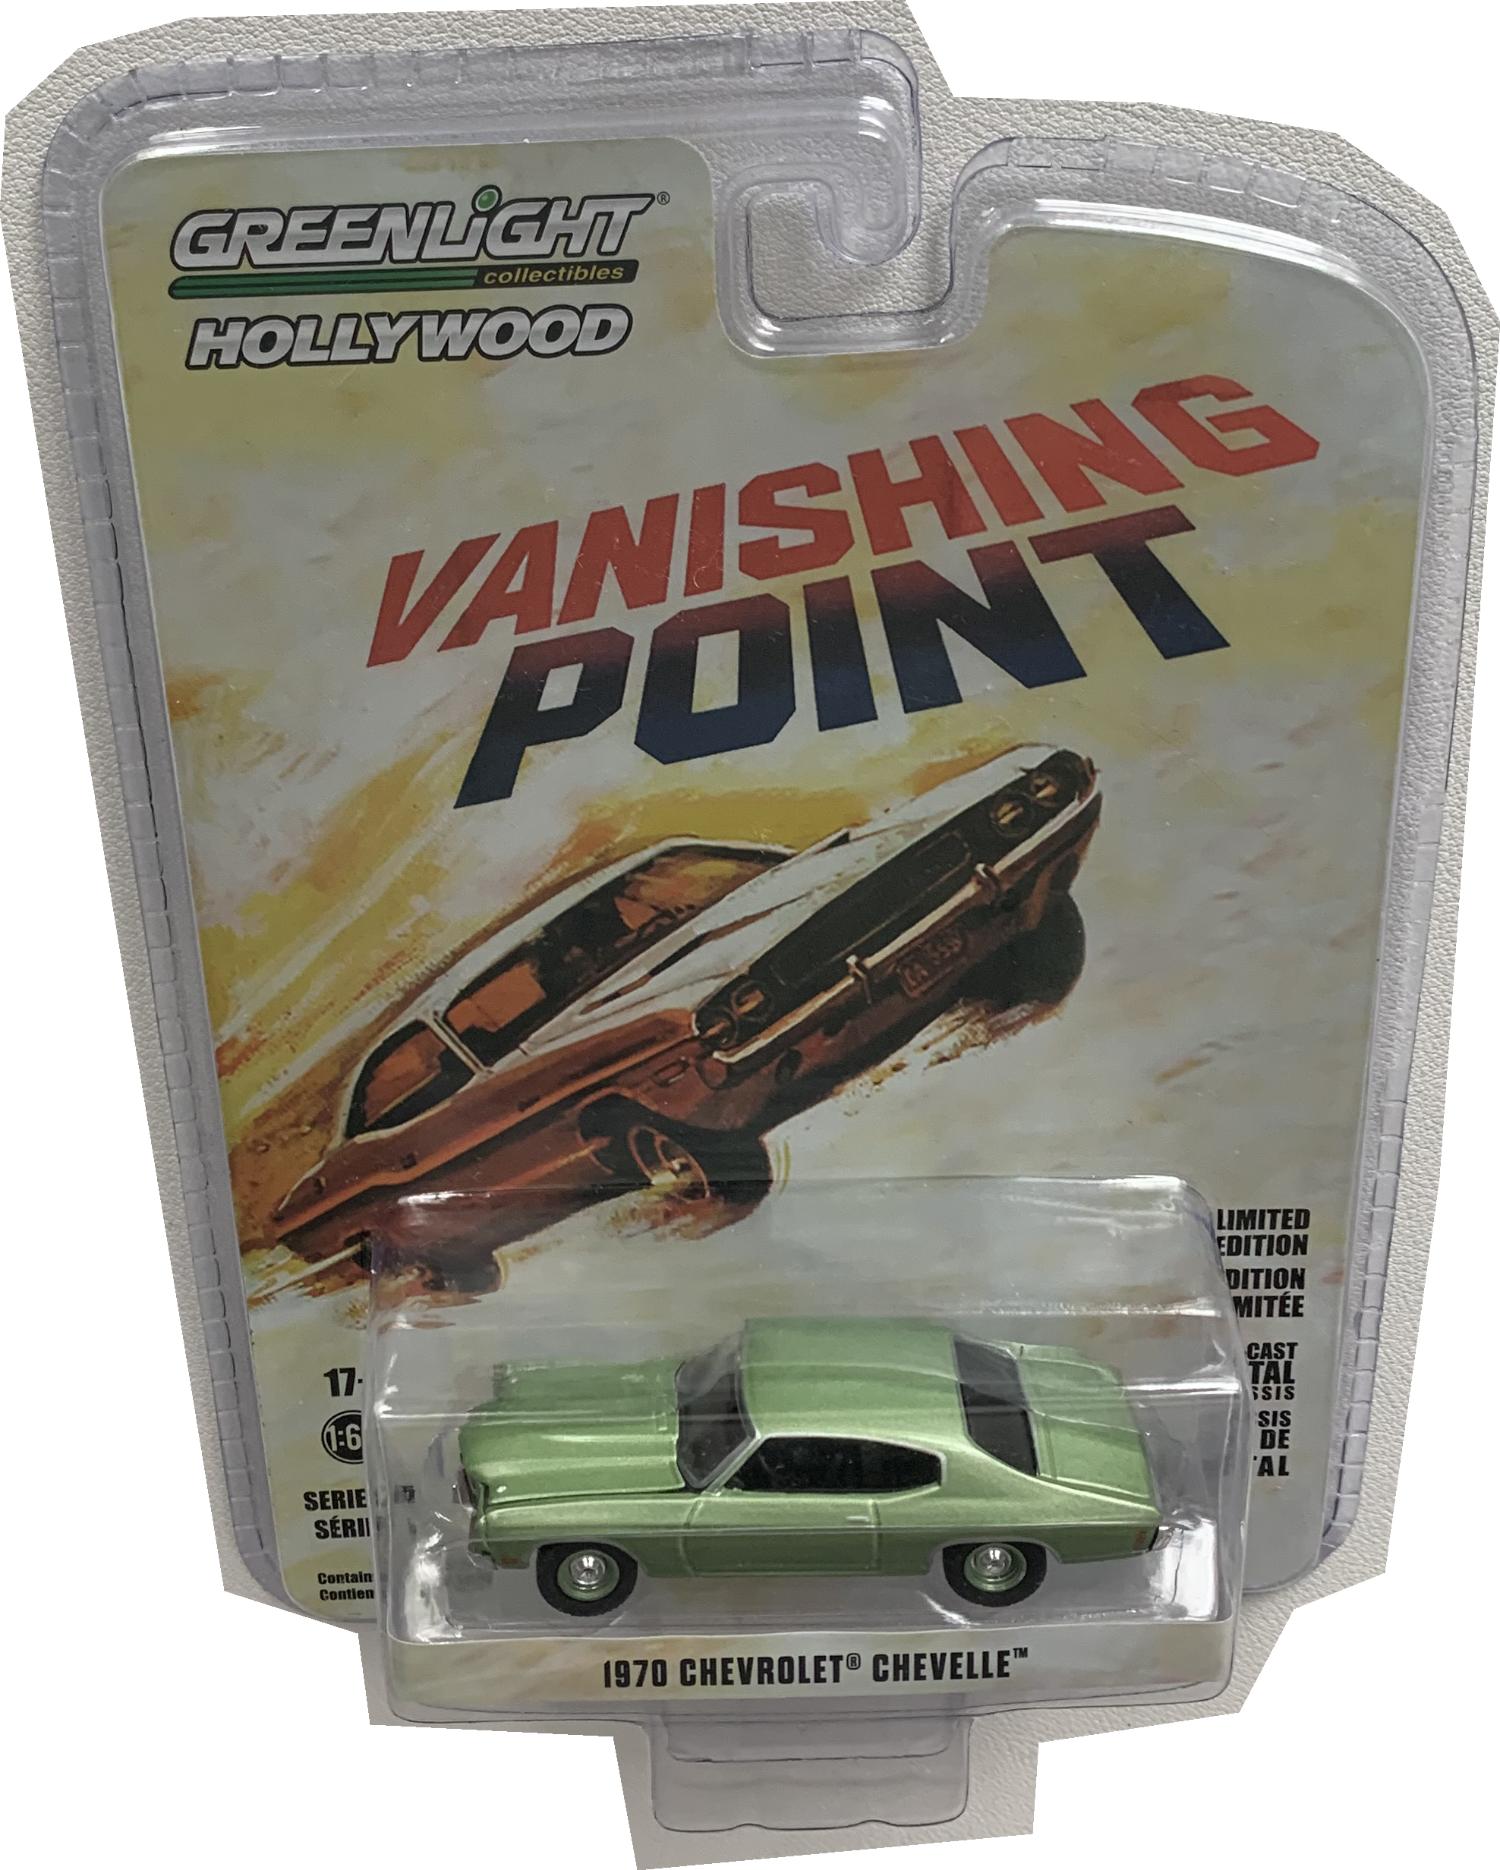 Vanishing Point 1970 Chevrolet Chevelle in metallic green 1:64 scale model from Greenlight , limited edition model